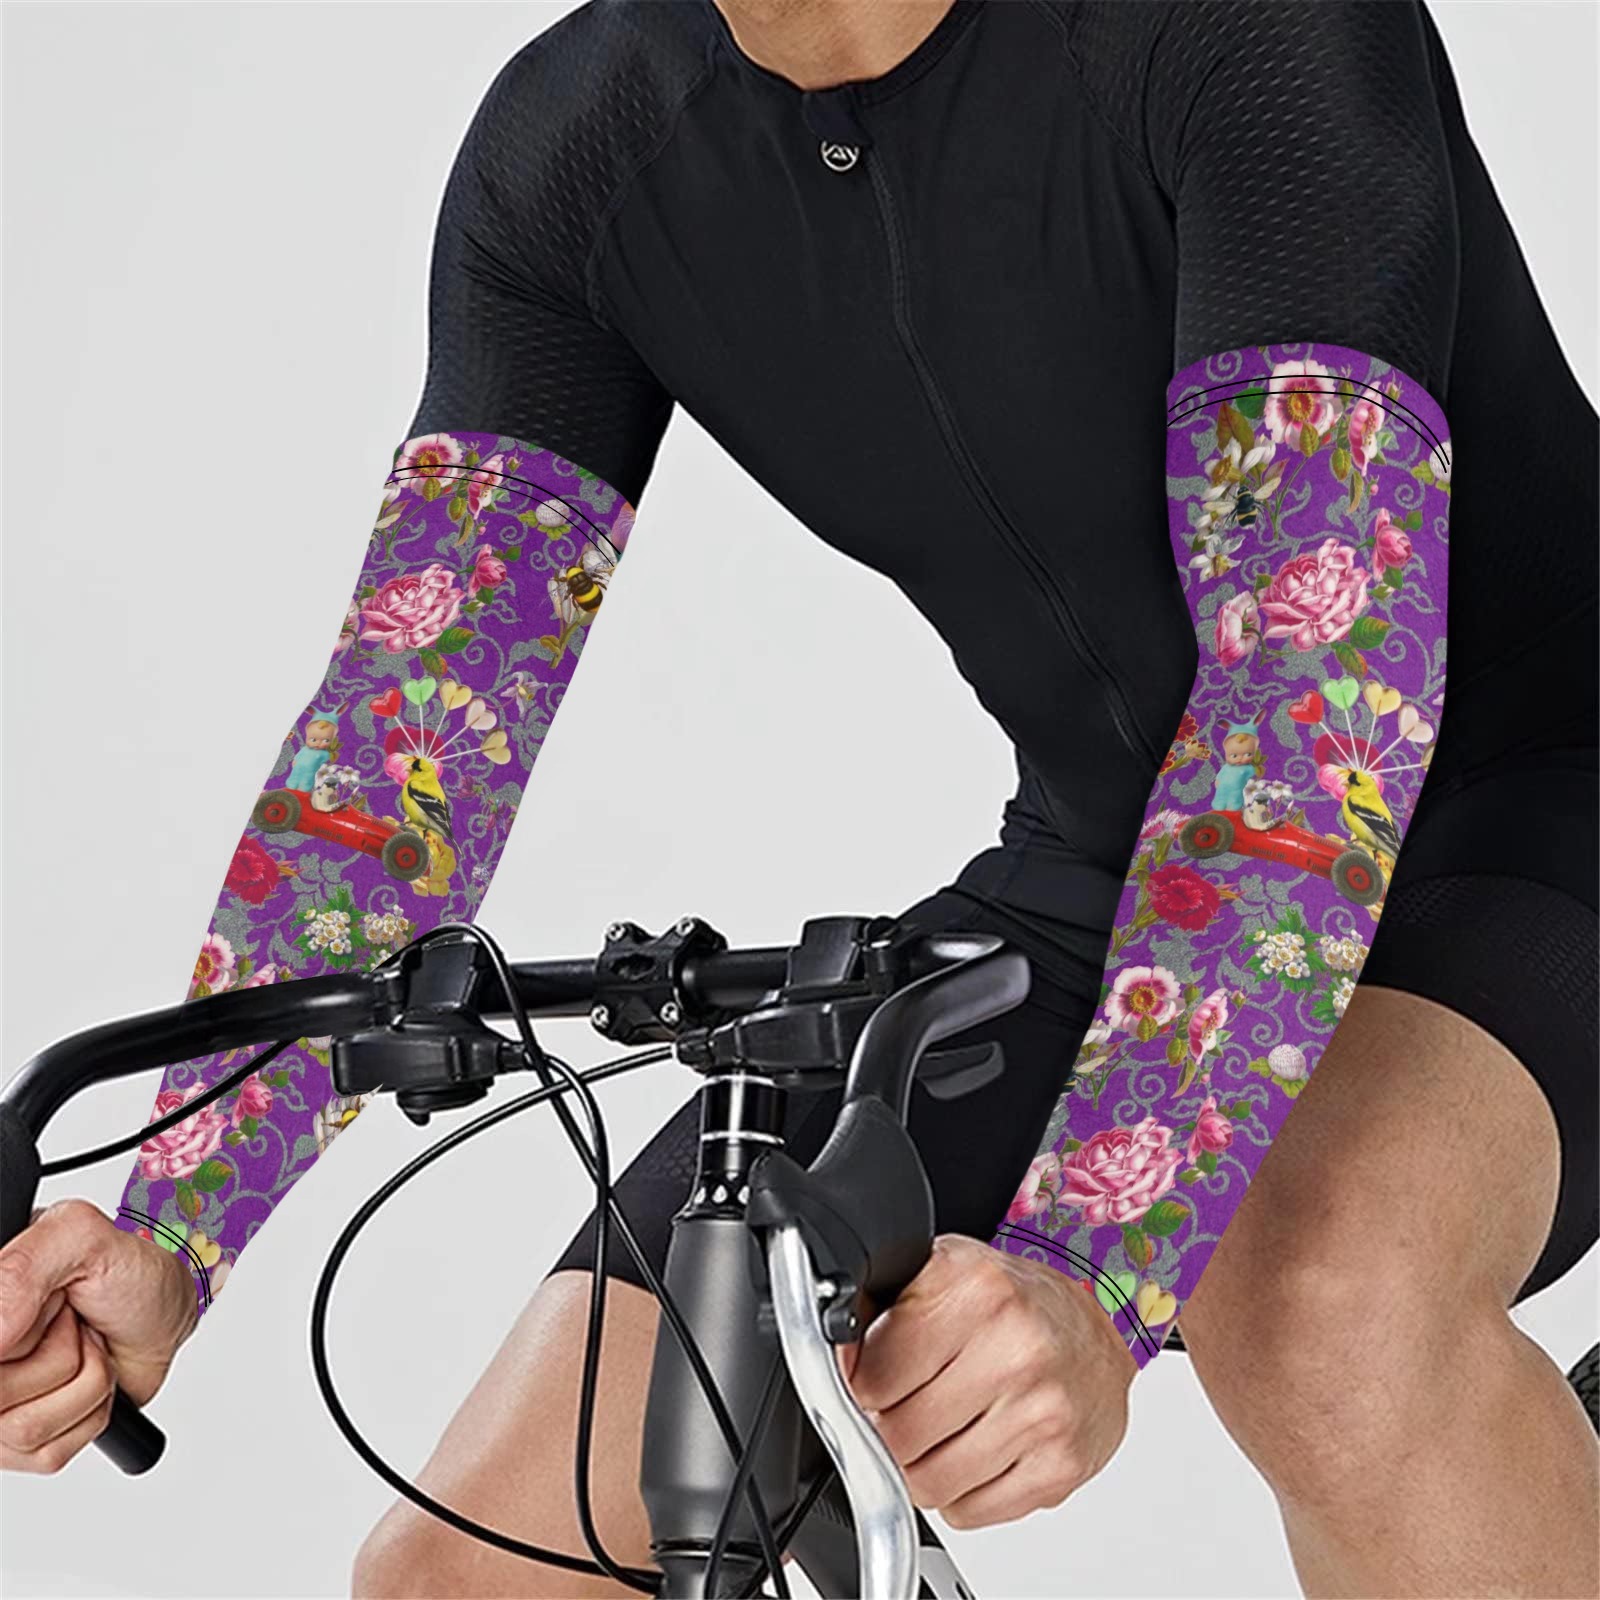 Spring Bank Holiday Arm Sleeves (Set of Two with Different Printings)